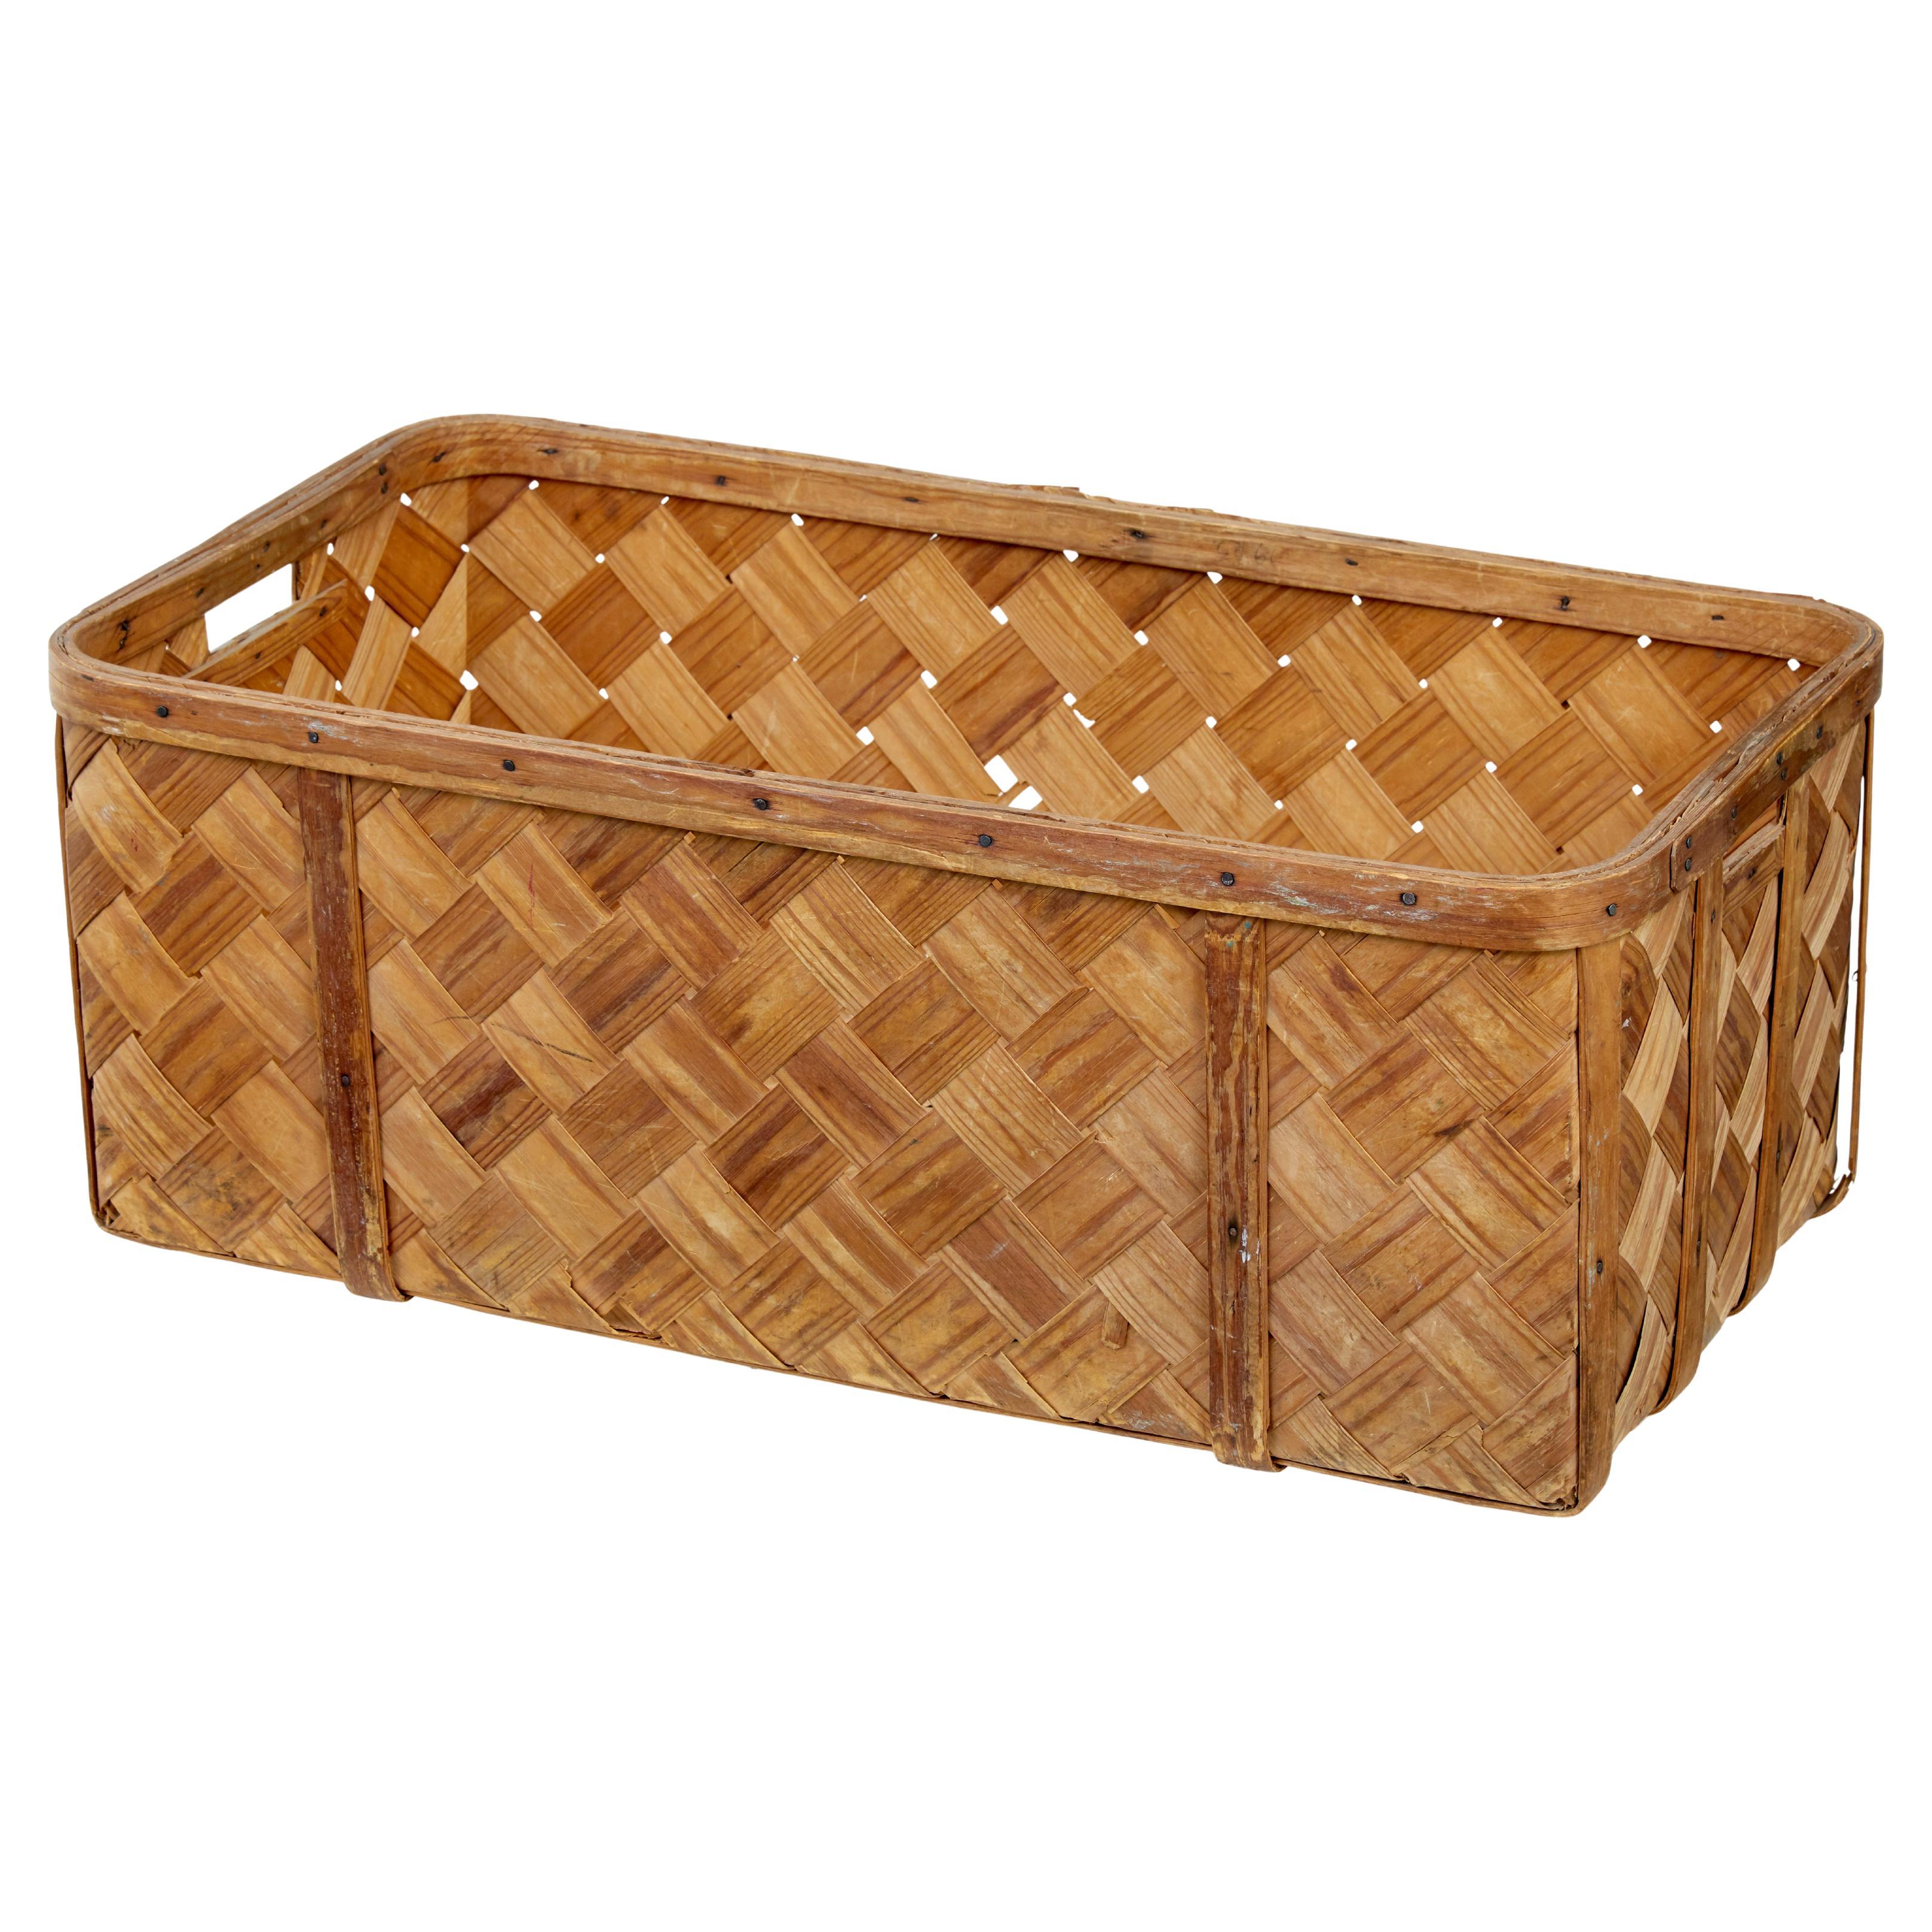 Swedish rustic 19th century pine woven basket For Sale